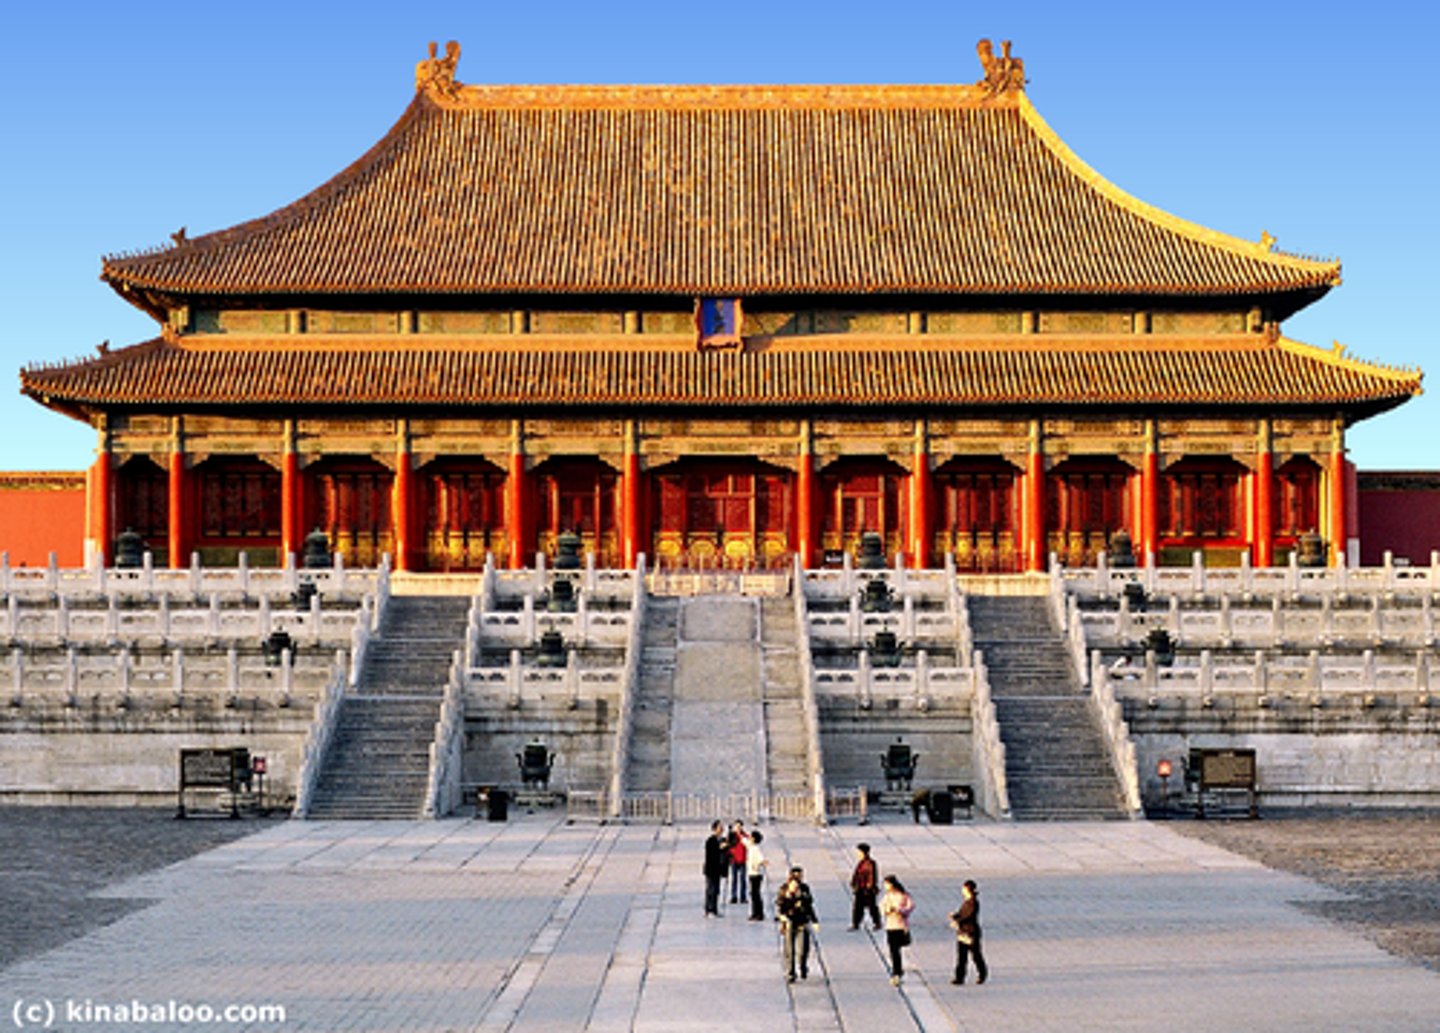 <p>Built in the Ming Dynasty, was a stunning residence in Beijing for the emperor until 1924.</p>